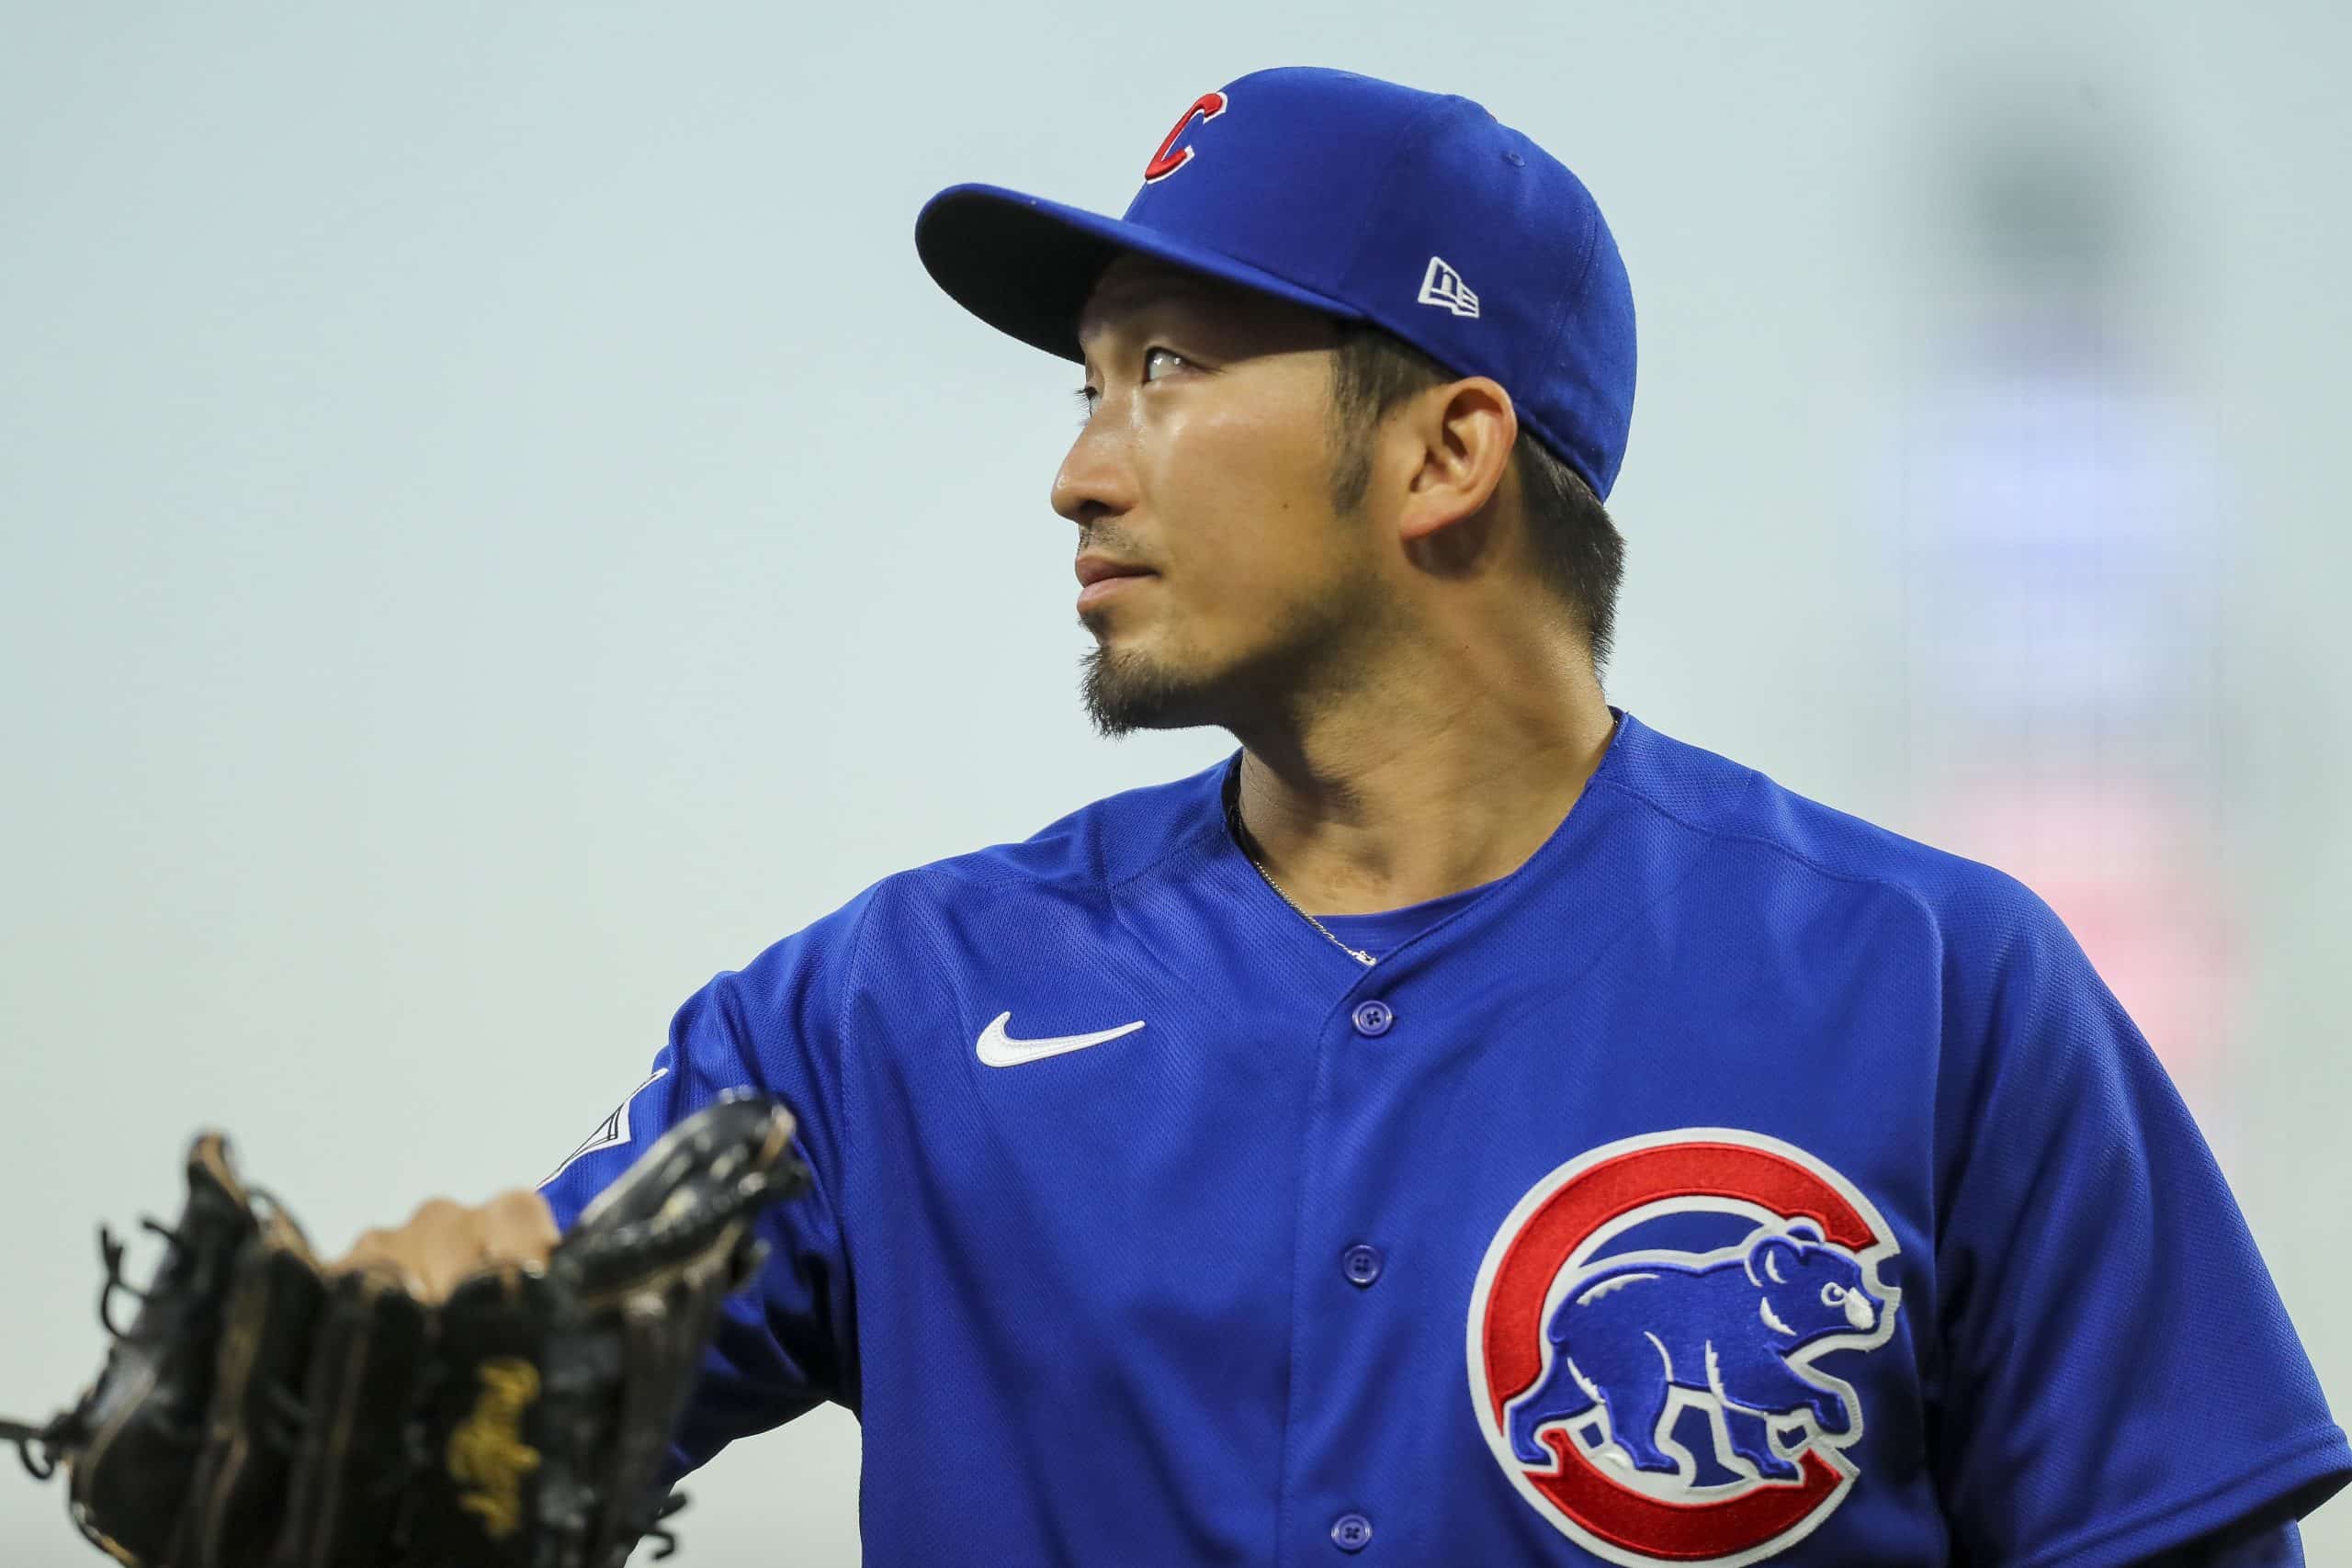 Chicago Cubs pitcher Kyle Hendricks is optimistic abiut his return to